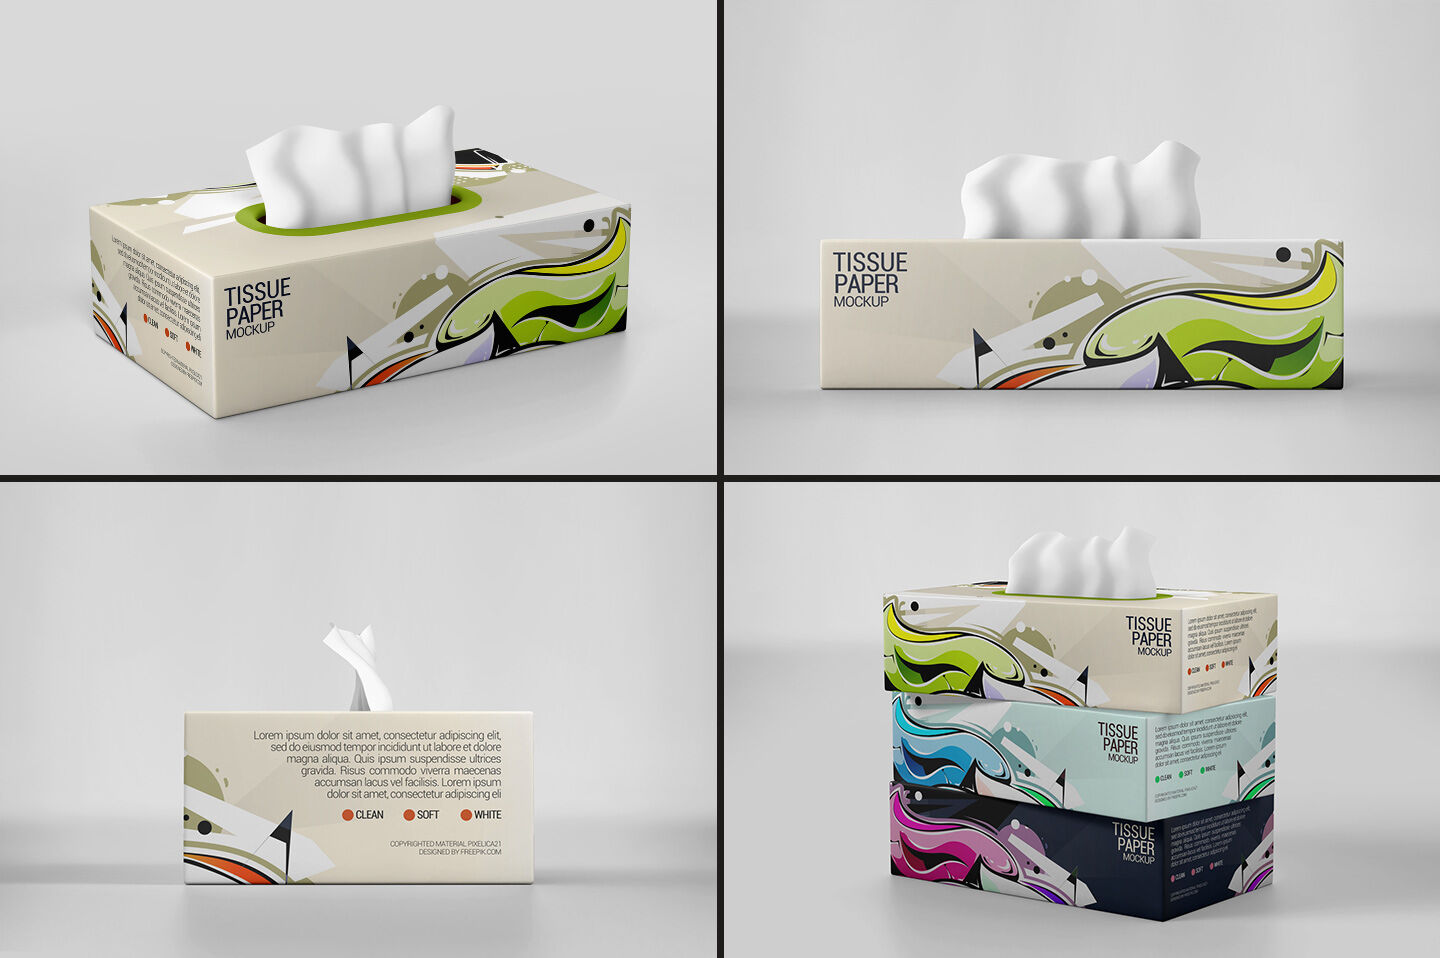 Download Tissue Paper Box Mockup By Pixelica21 Thehungryjpeg Com